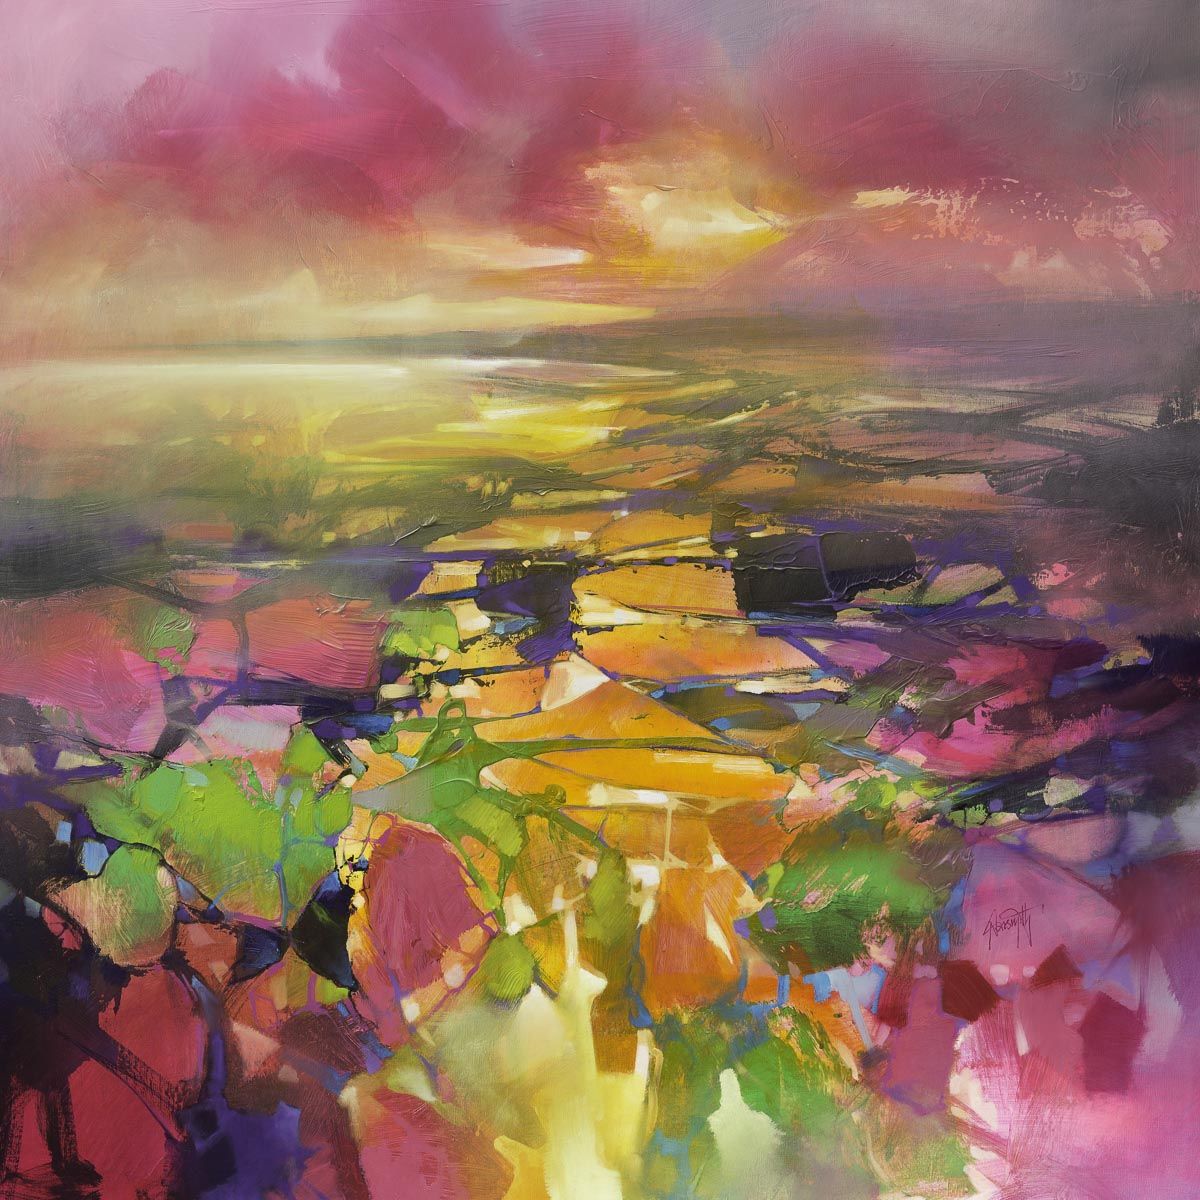 Fragments from above by Scott Naismith